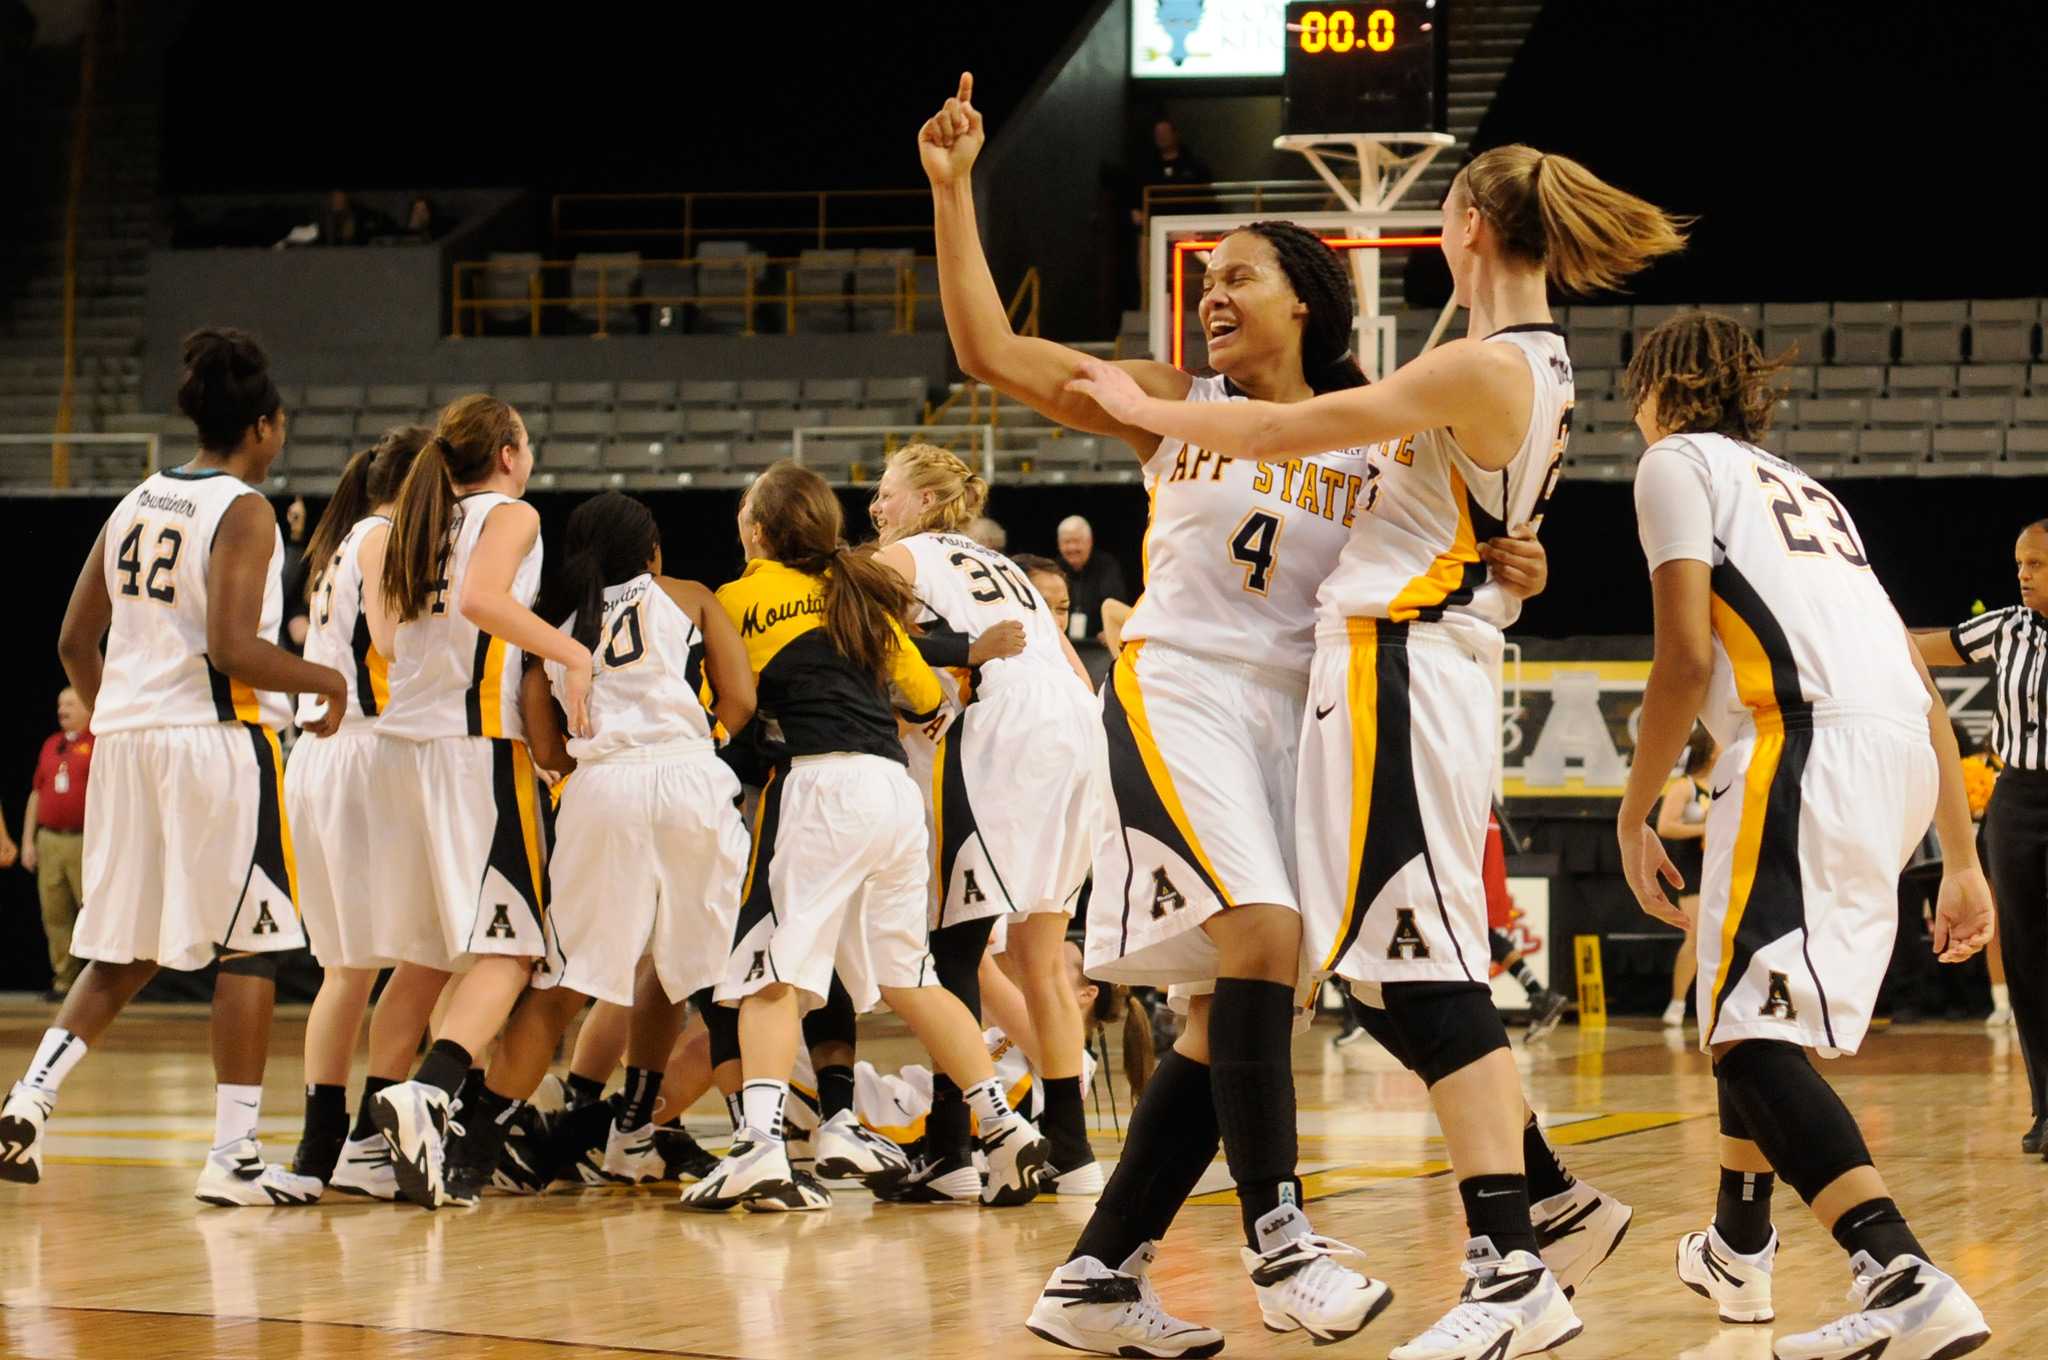 App State womens basketball celebrates after their home win over Arkansas State by a final score of 70-69. Justin Perry | The Appalachian